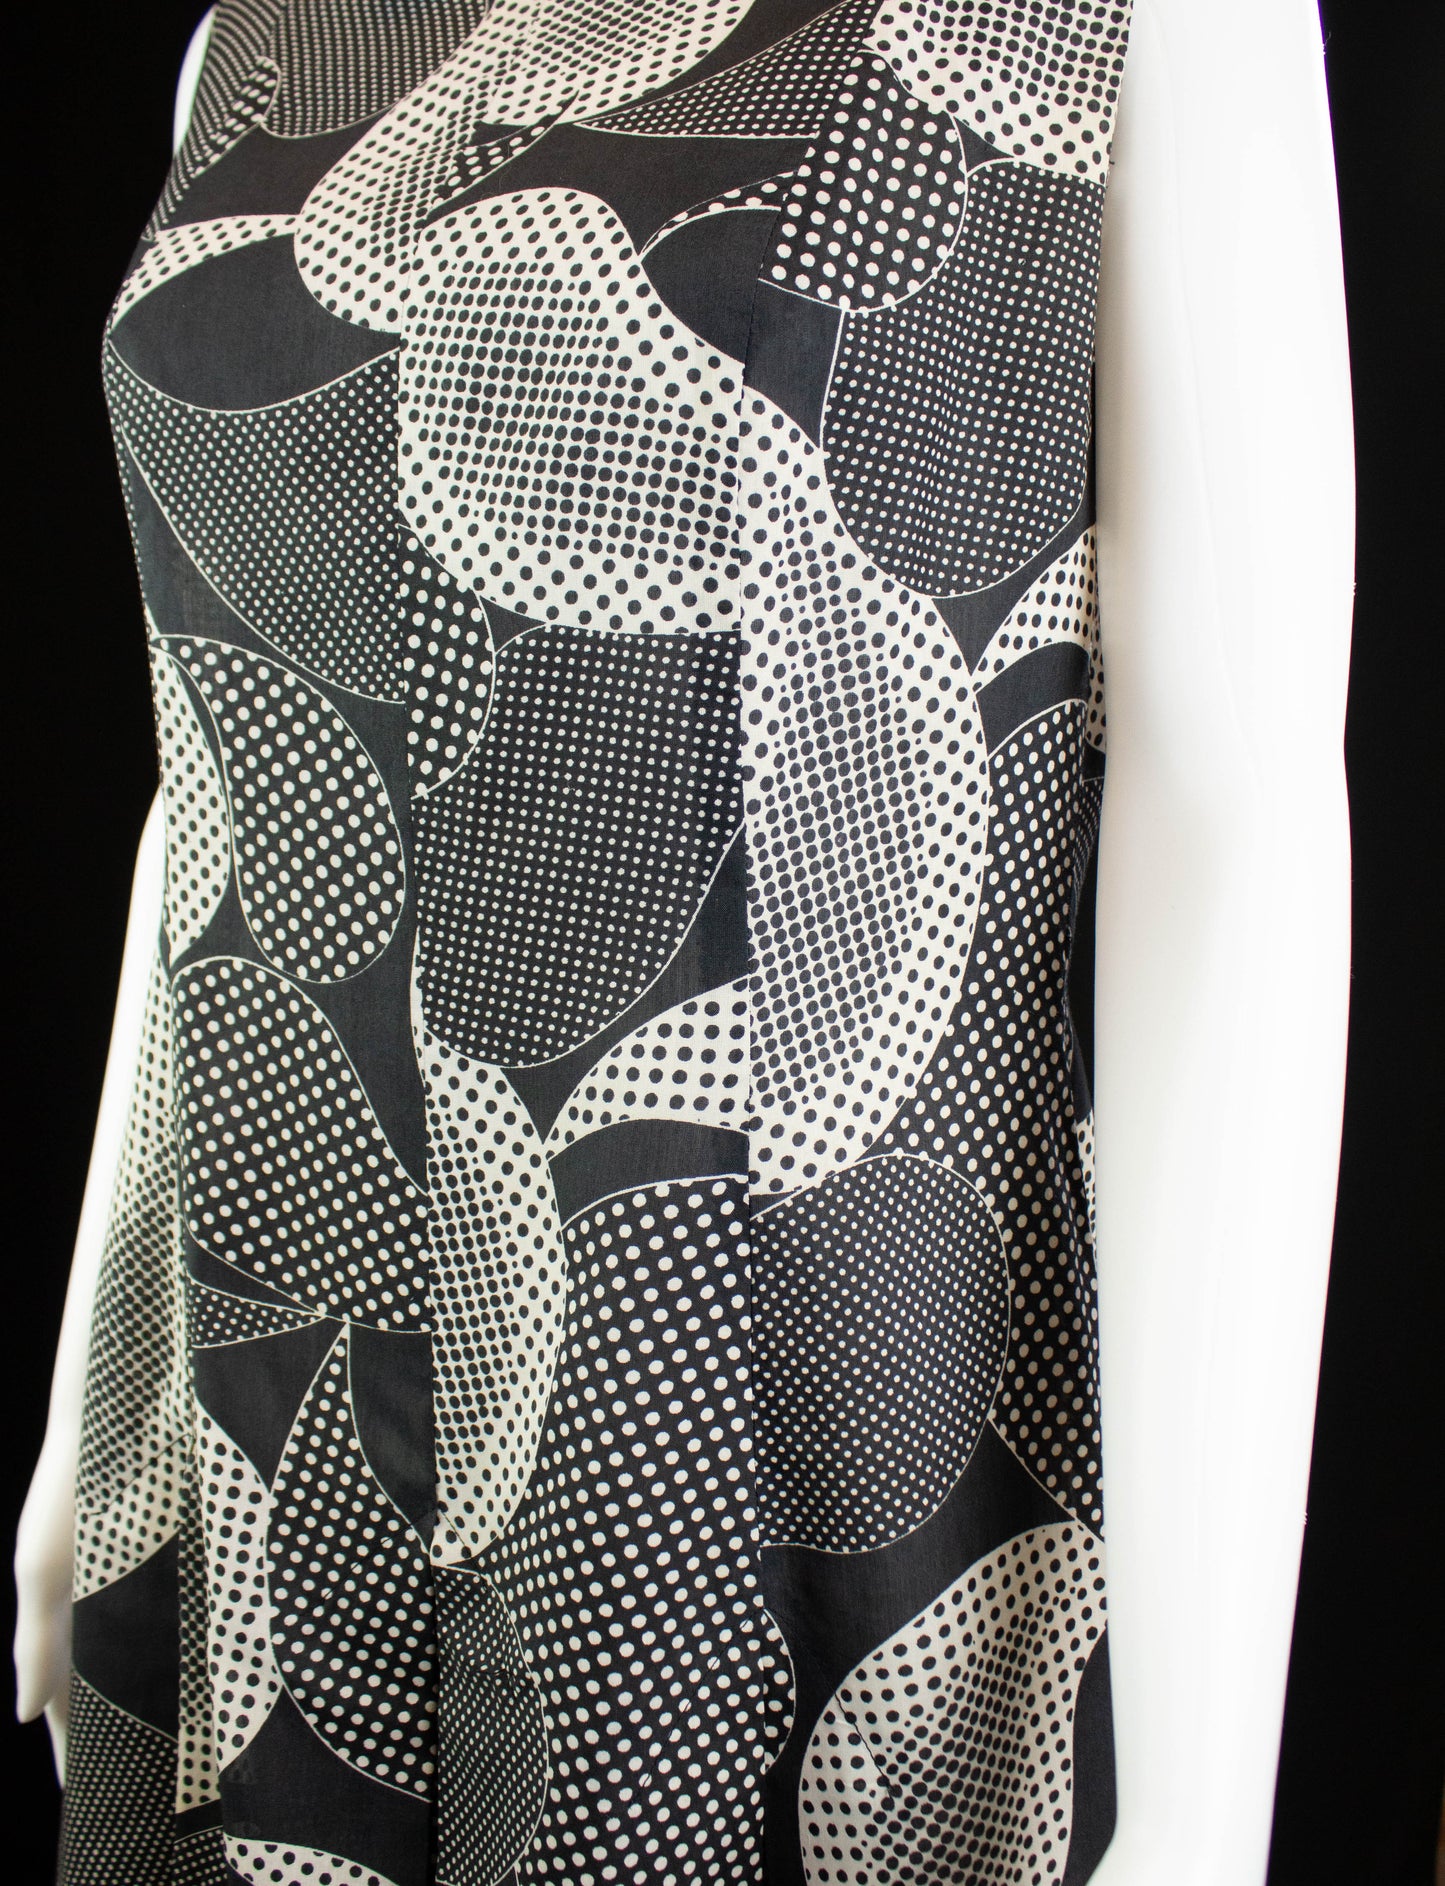 Vintage Abstract Polka Dot Dress With Pleated Skirt 60s Black and White Medium